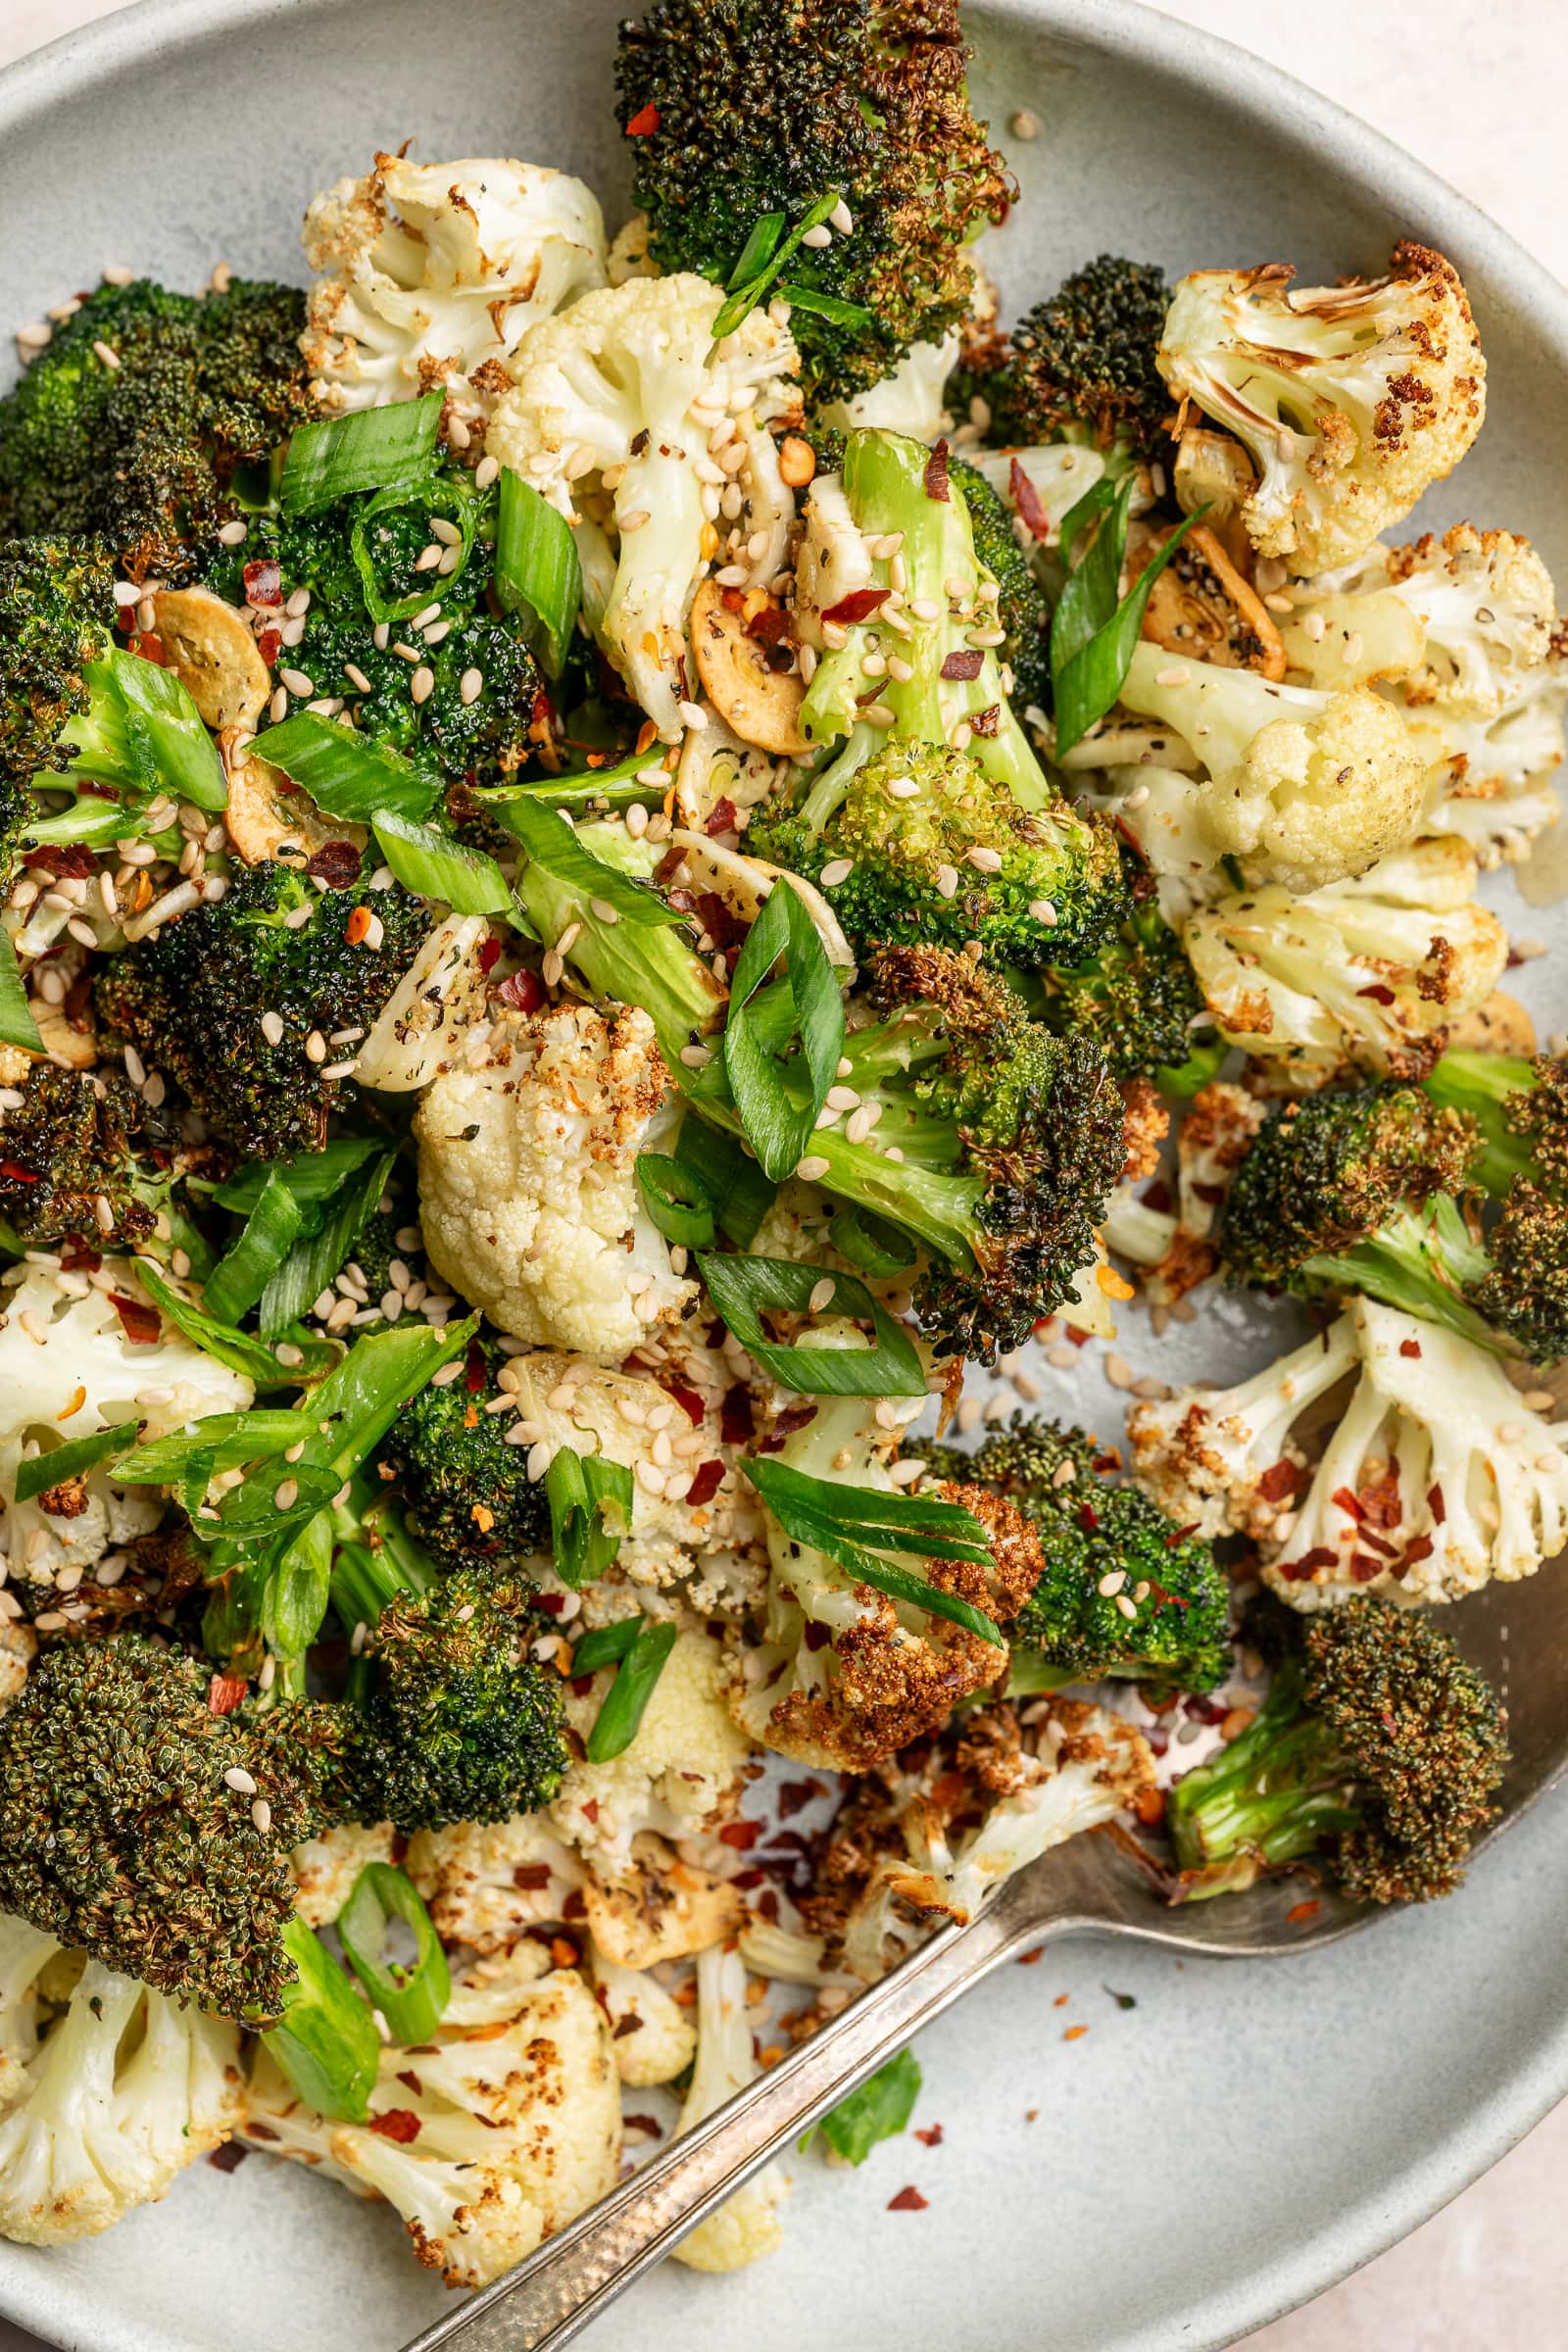 Close up of crispy broccoli and cauliflower with sesame seeds, chili flakes, and green onions.